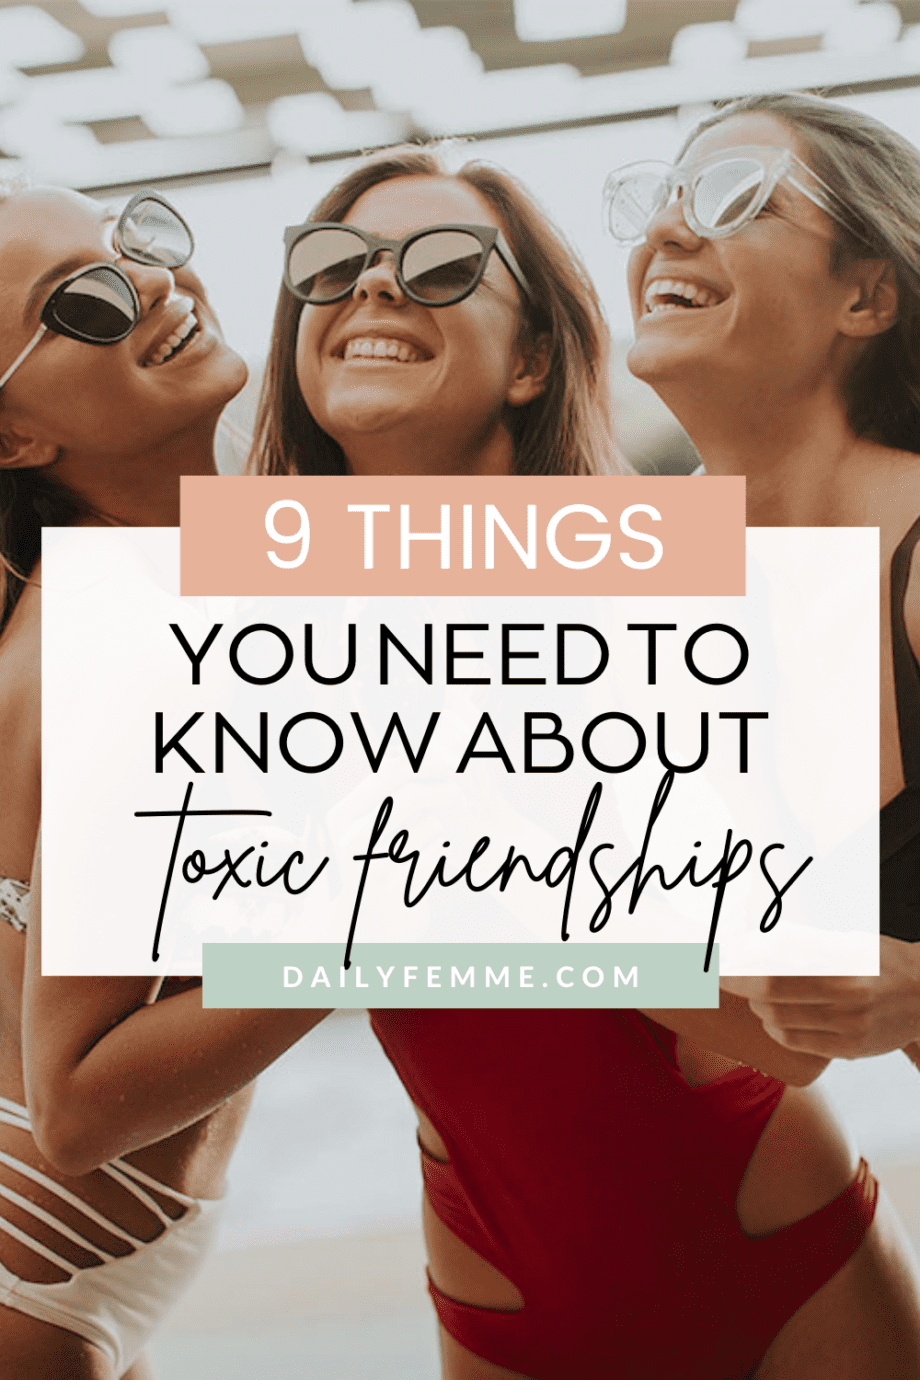 Learn what to do when you're in a toxic friendship, how to figure out if your friendships are toxic, and the signs that show if you're stuck in one